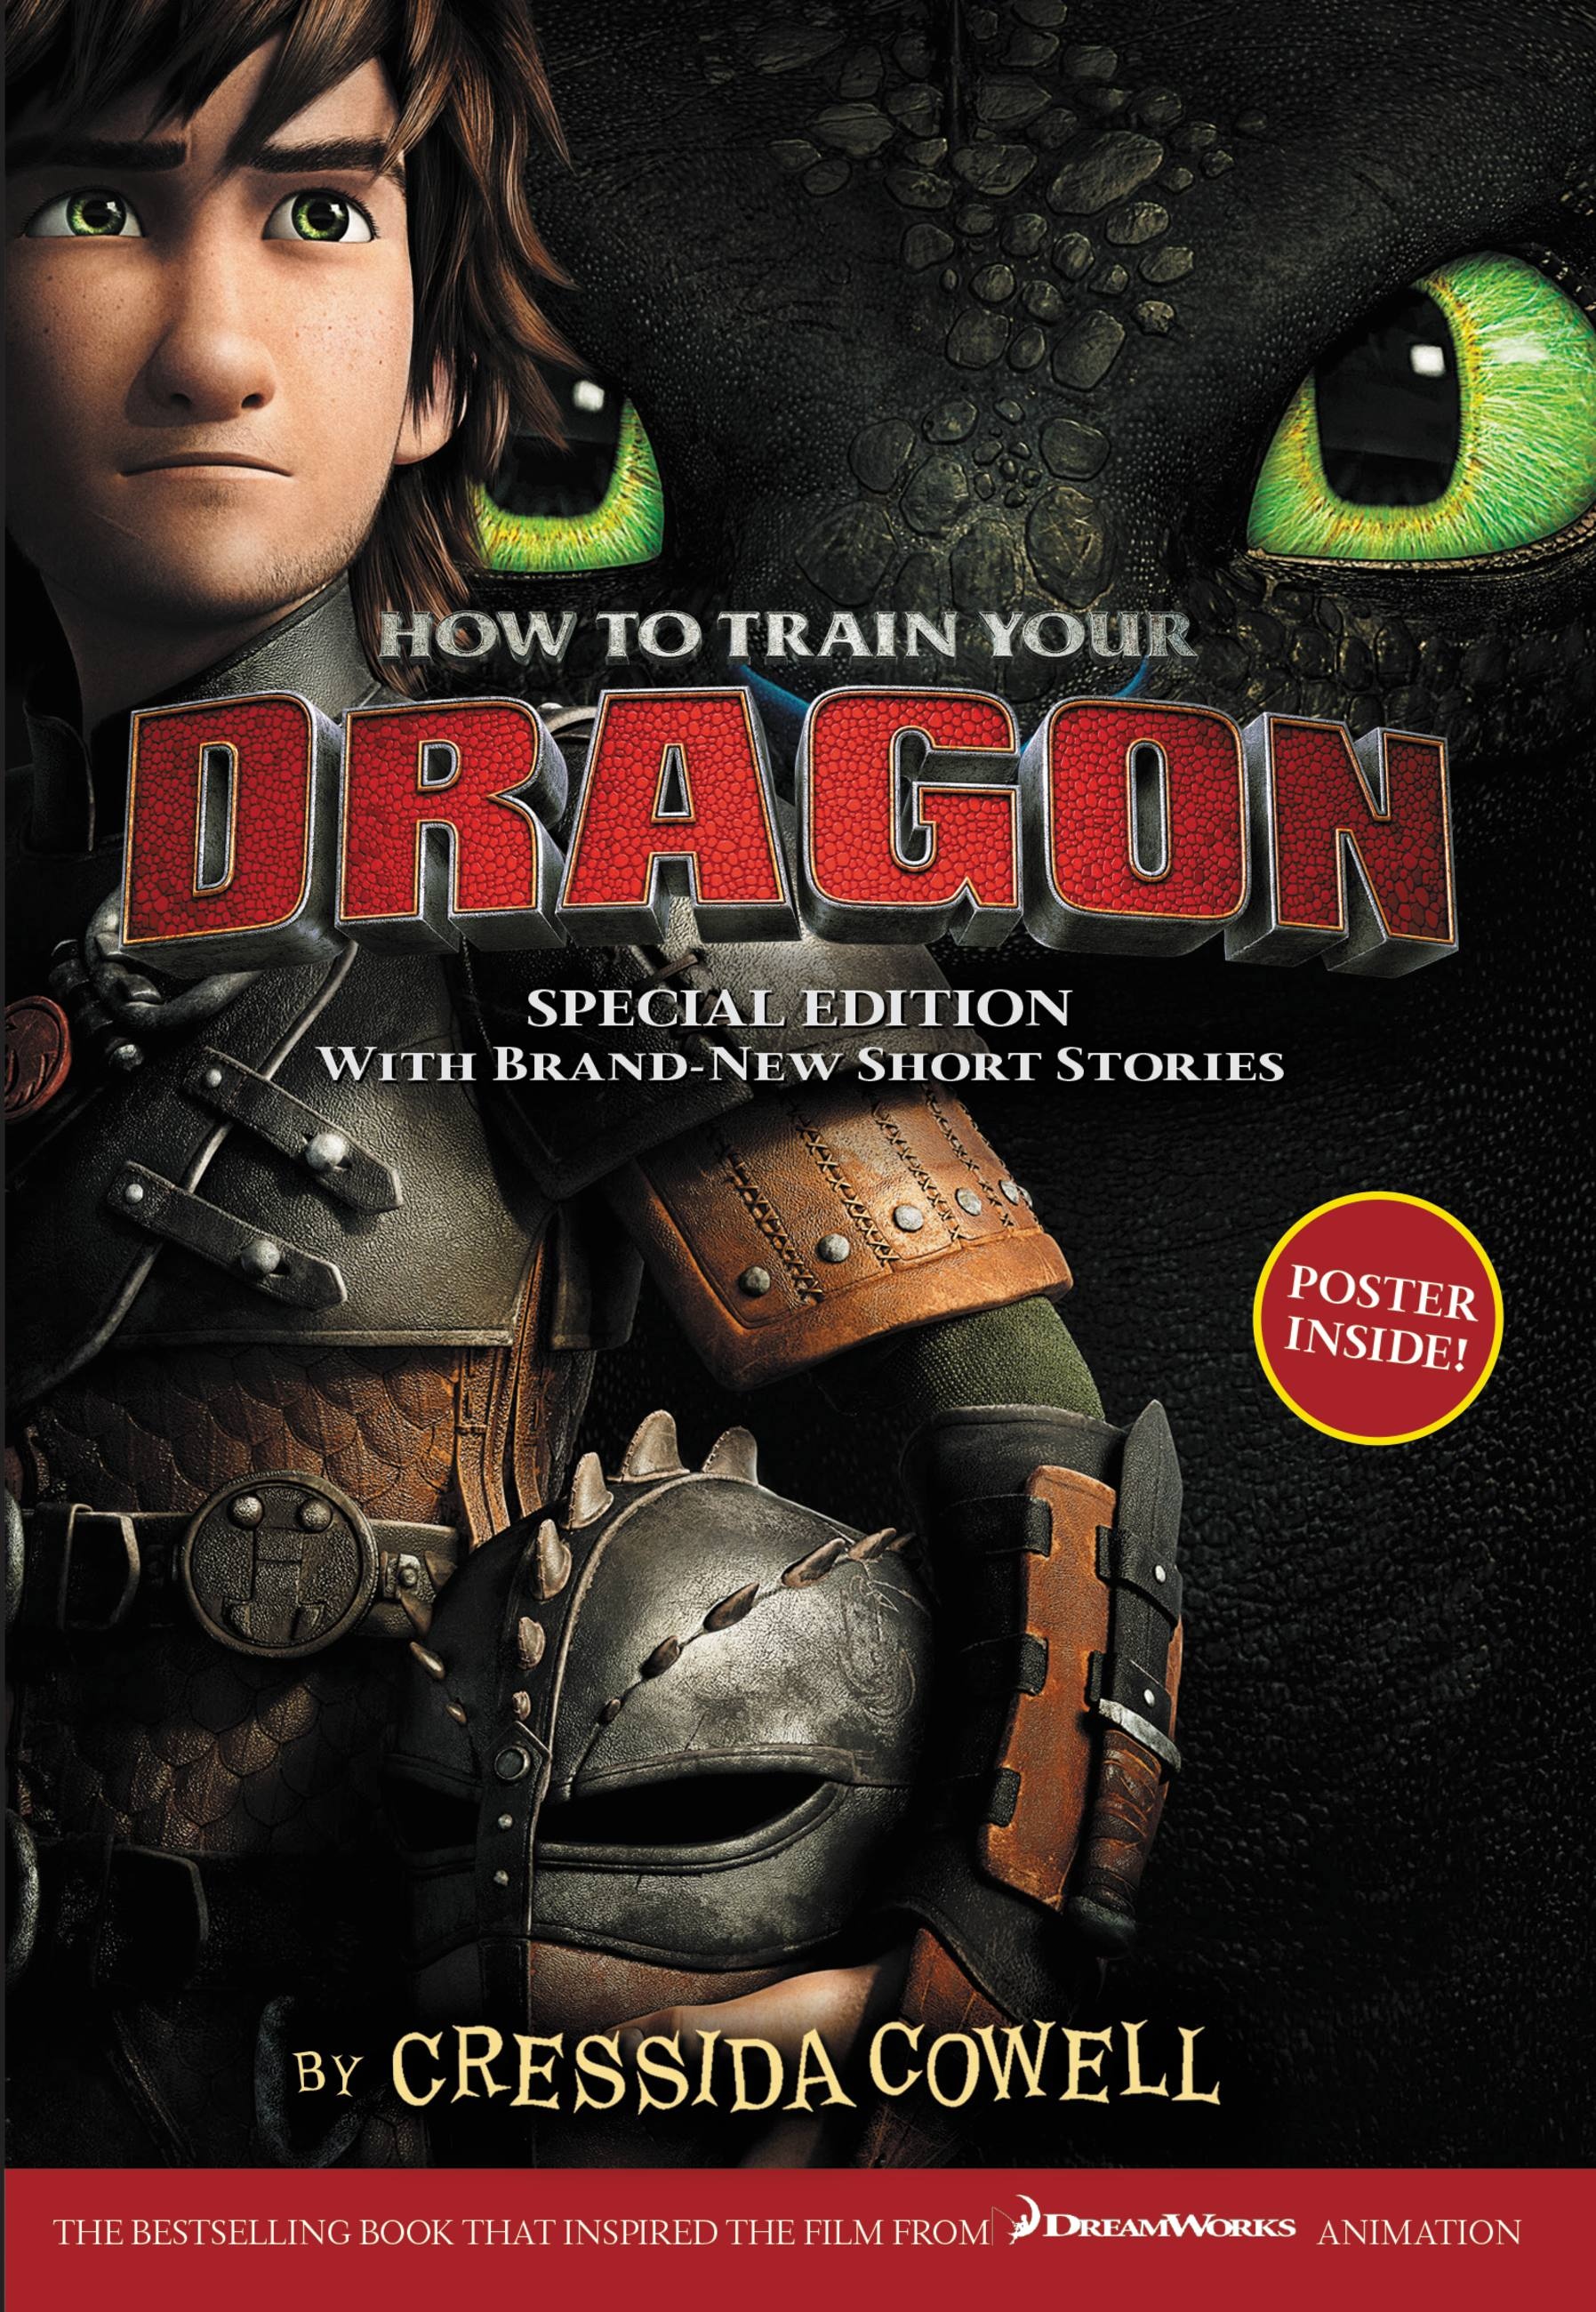 Your　Book　How　Edition　Train　Hachette　Cowell　Cressida　Group　Special　Dragon　to　by